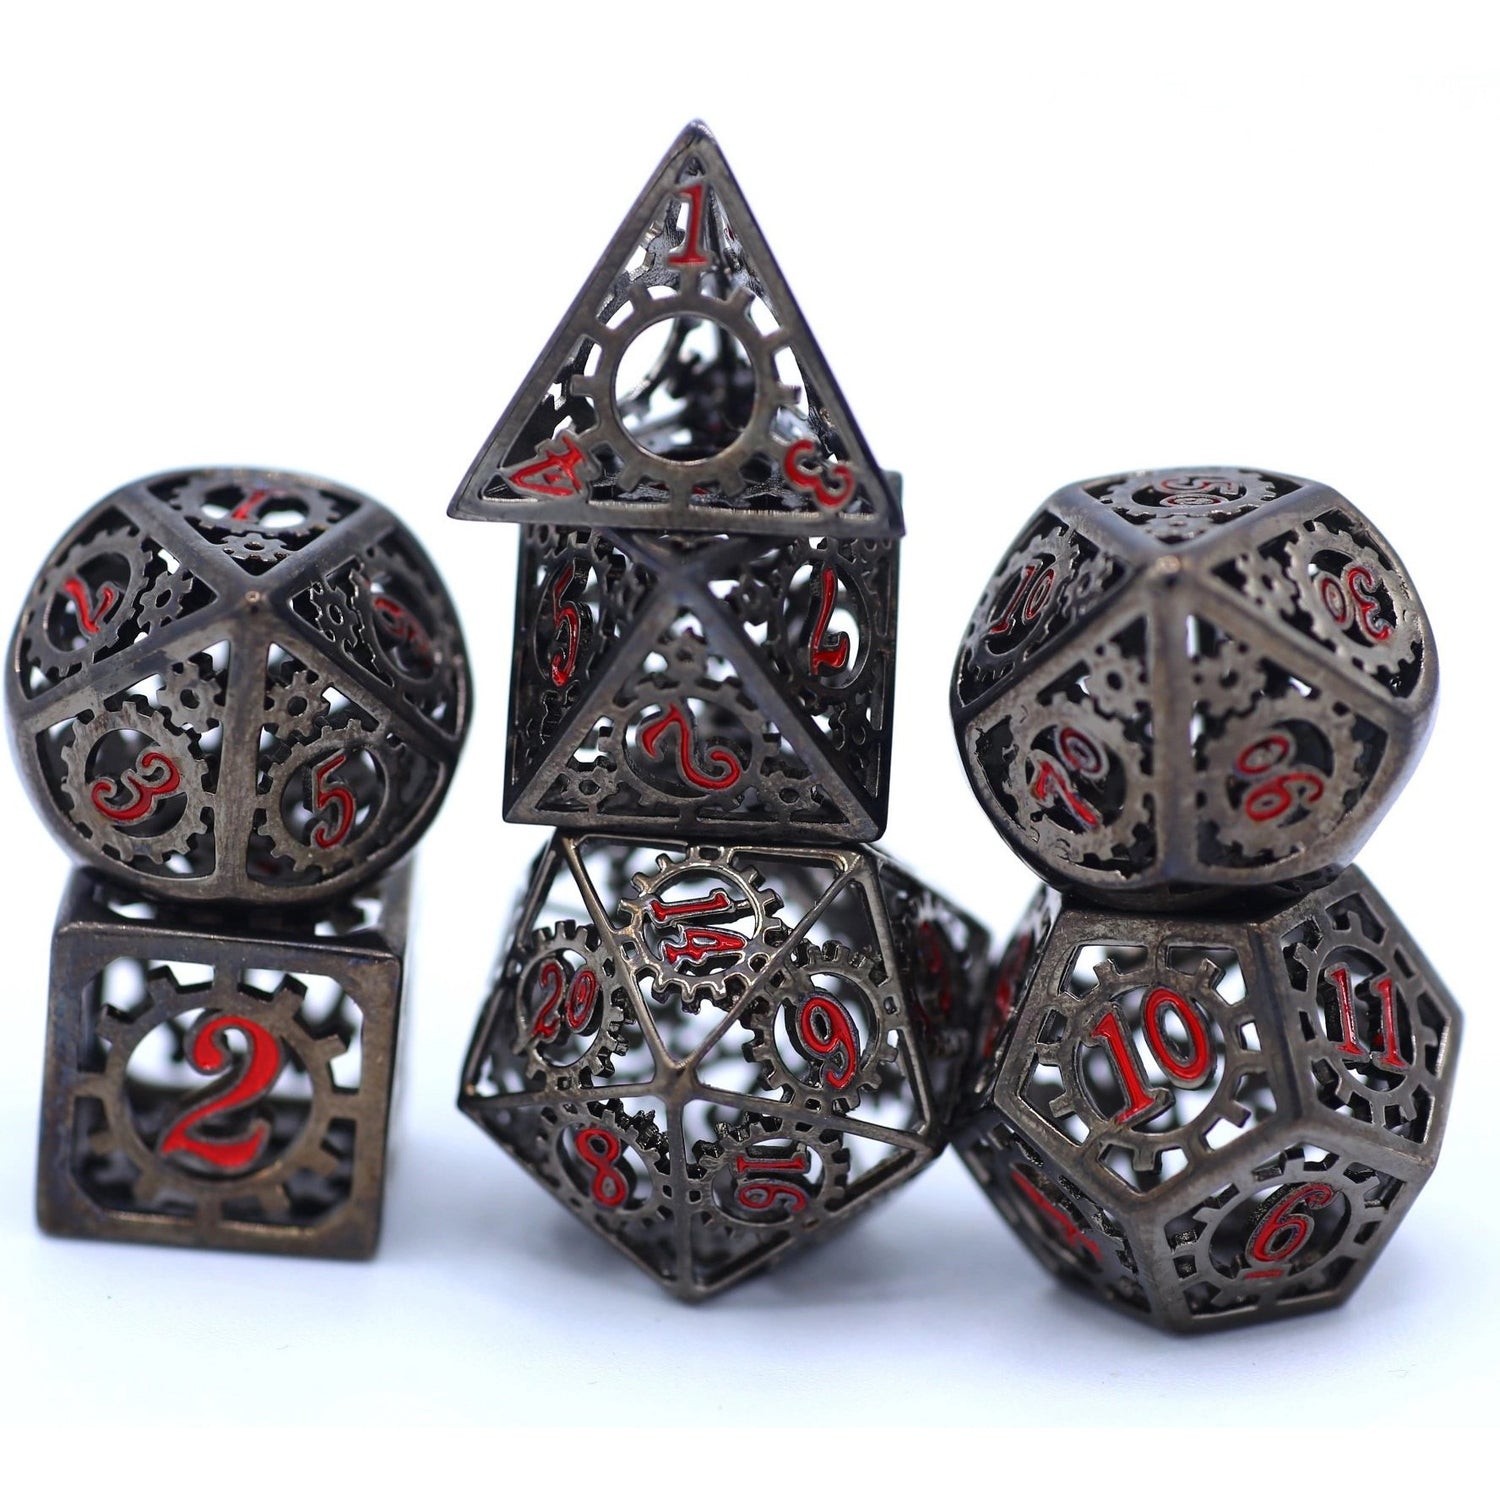 Black and Blood Hollow Metal Gears of Providence Polyhedral Dice Set